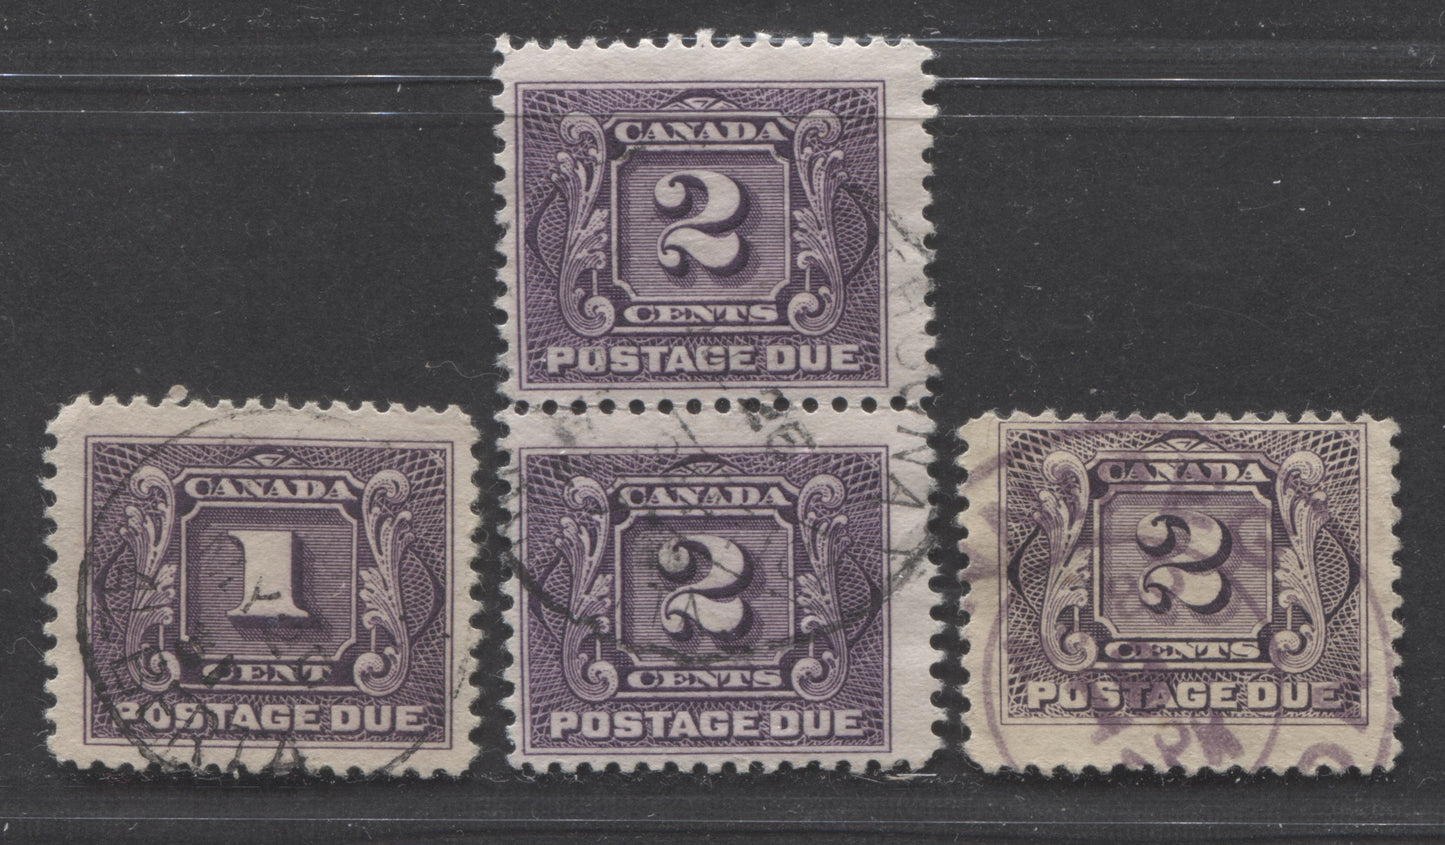 Lot 5 Canada #J1c, J2, J2c 2c Blackish Purple & Deep Rose Lilac, 1906-1928 First Postage Due Issue, 3 Fine/Very Fine Used Singles & Pair, Wet & Dry Printings